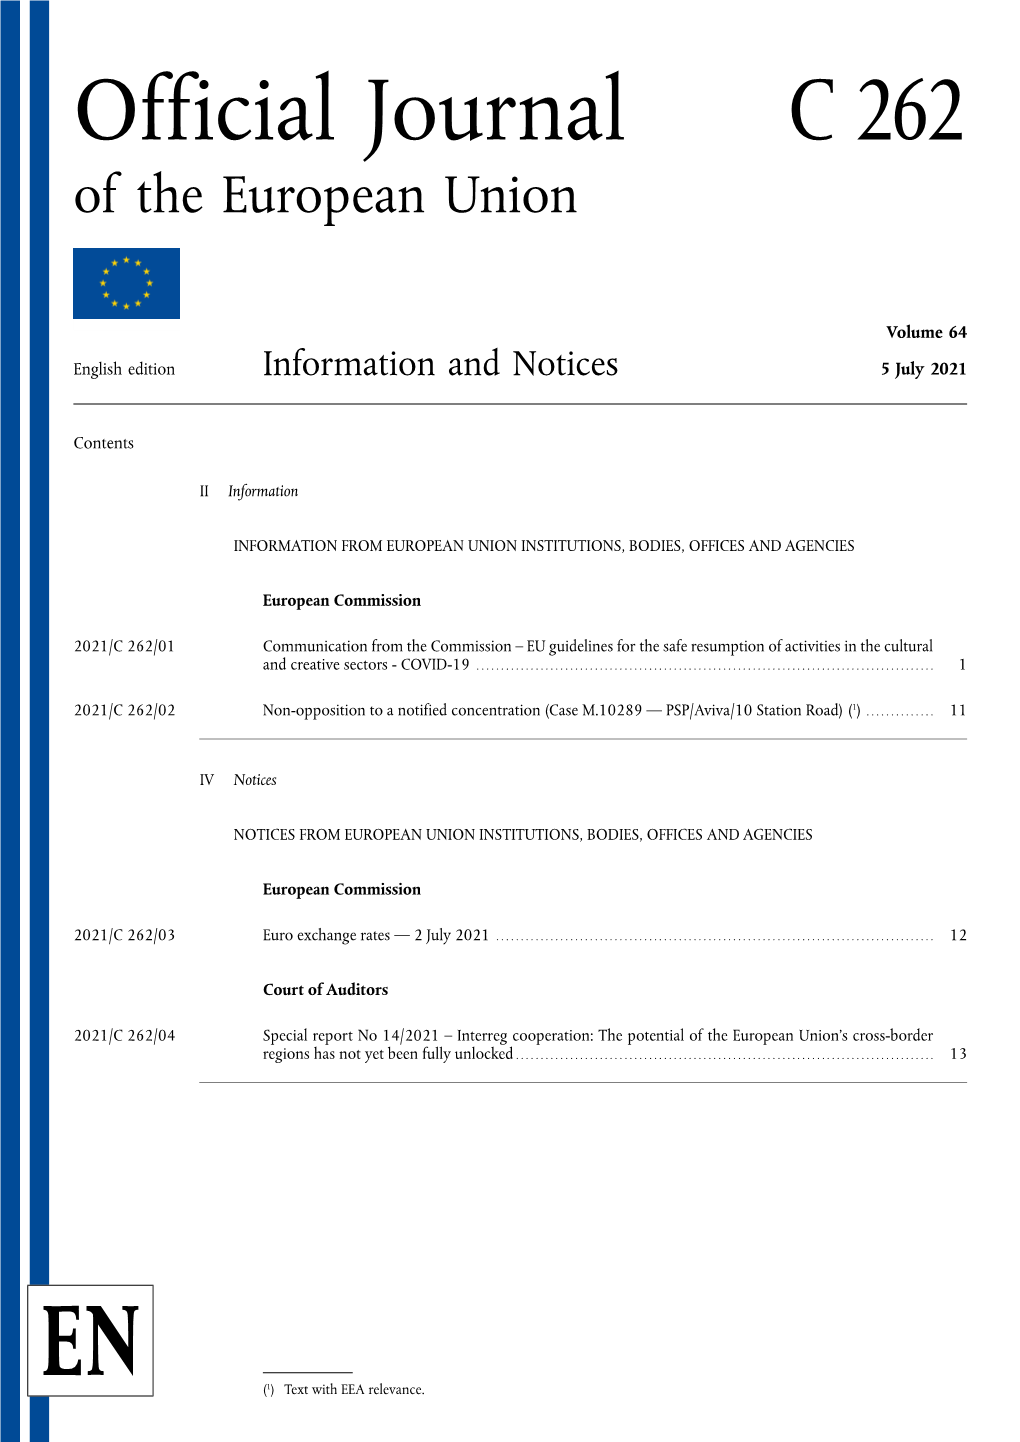 Official Journal C 262 of the European Union